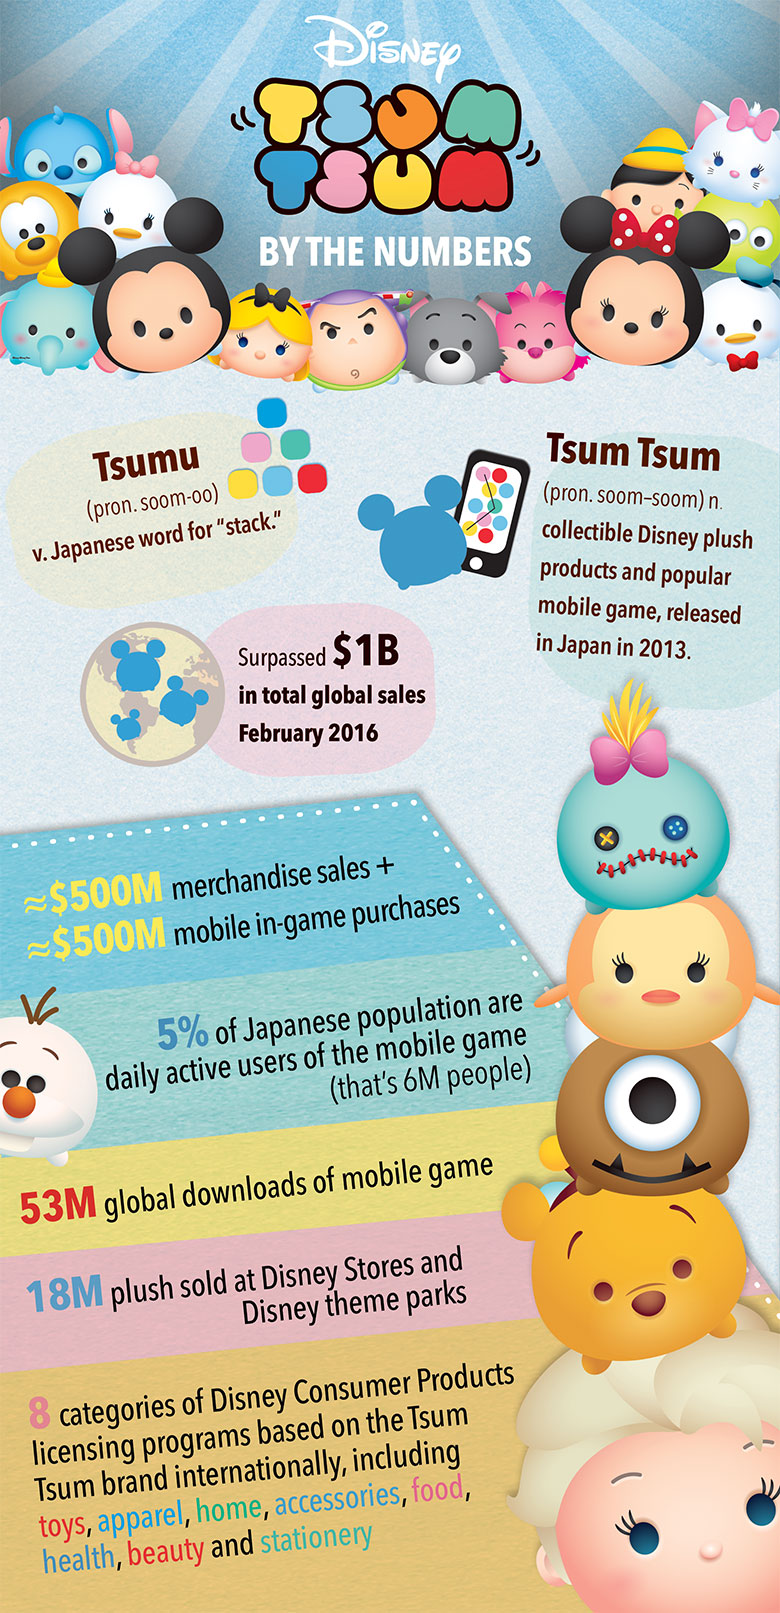 Tsum Tsum by the numbers